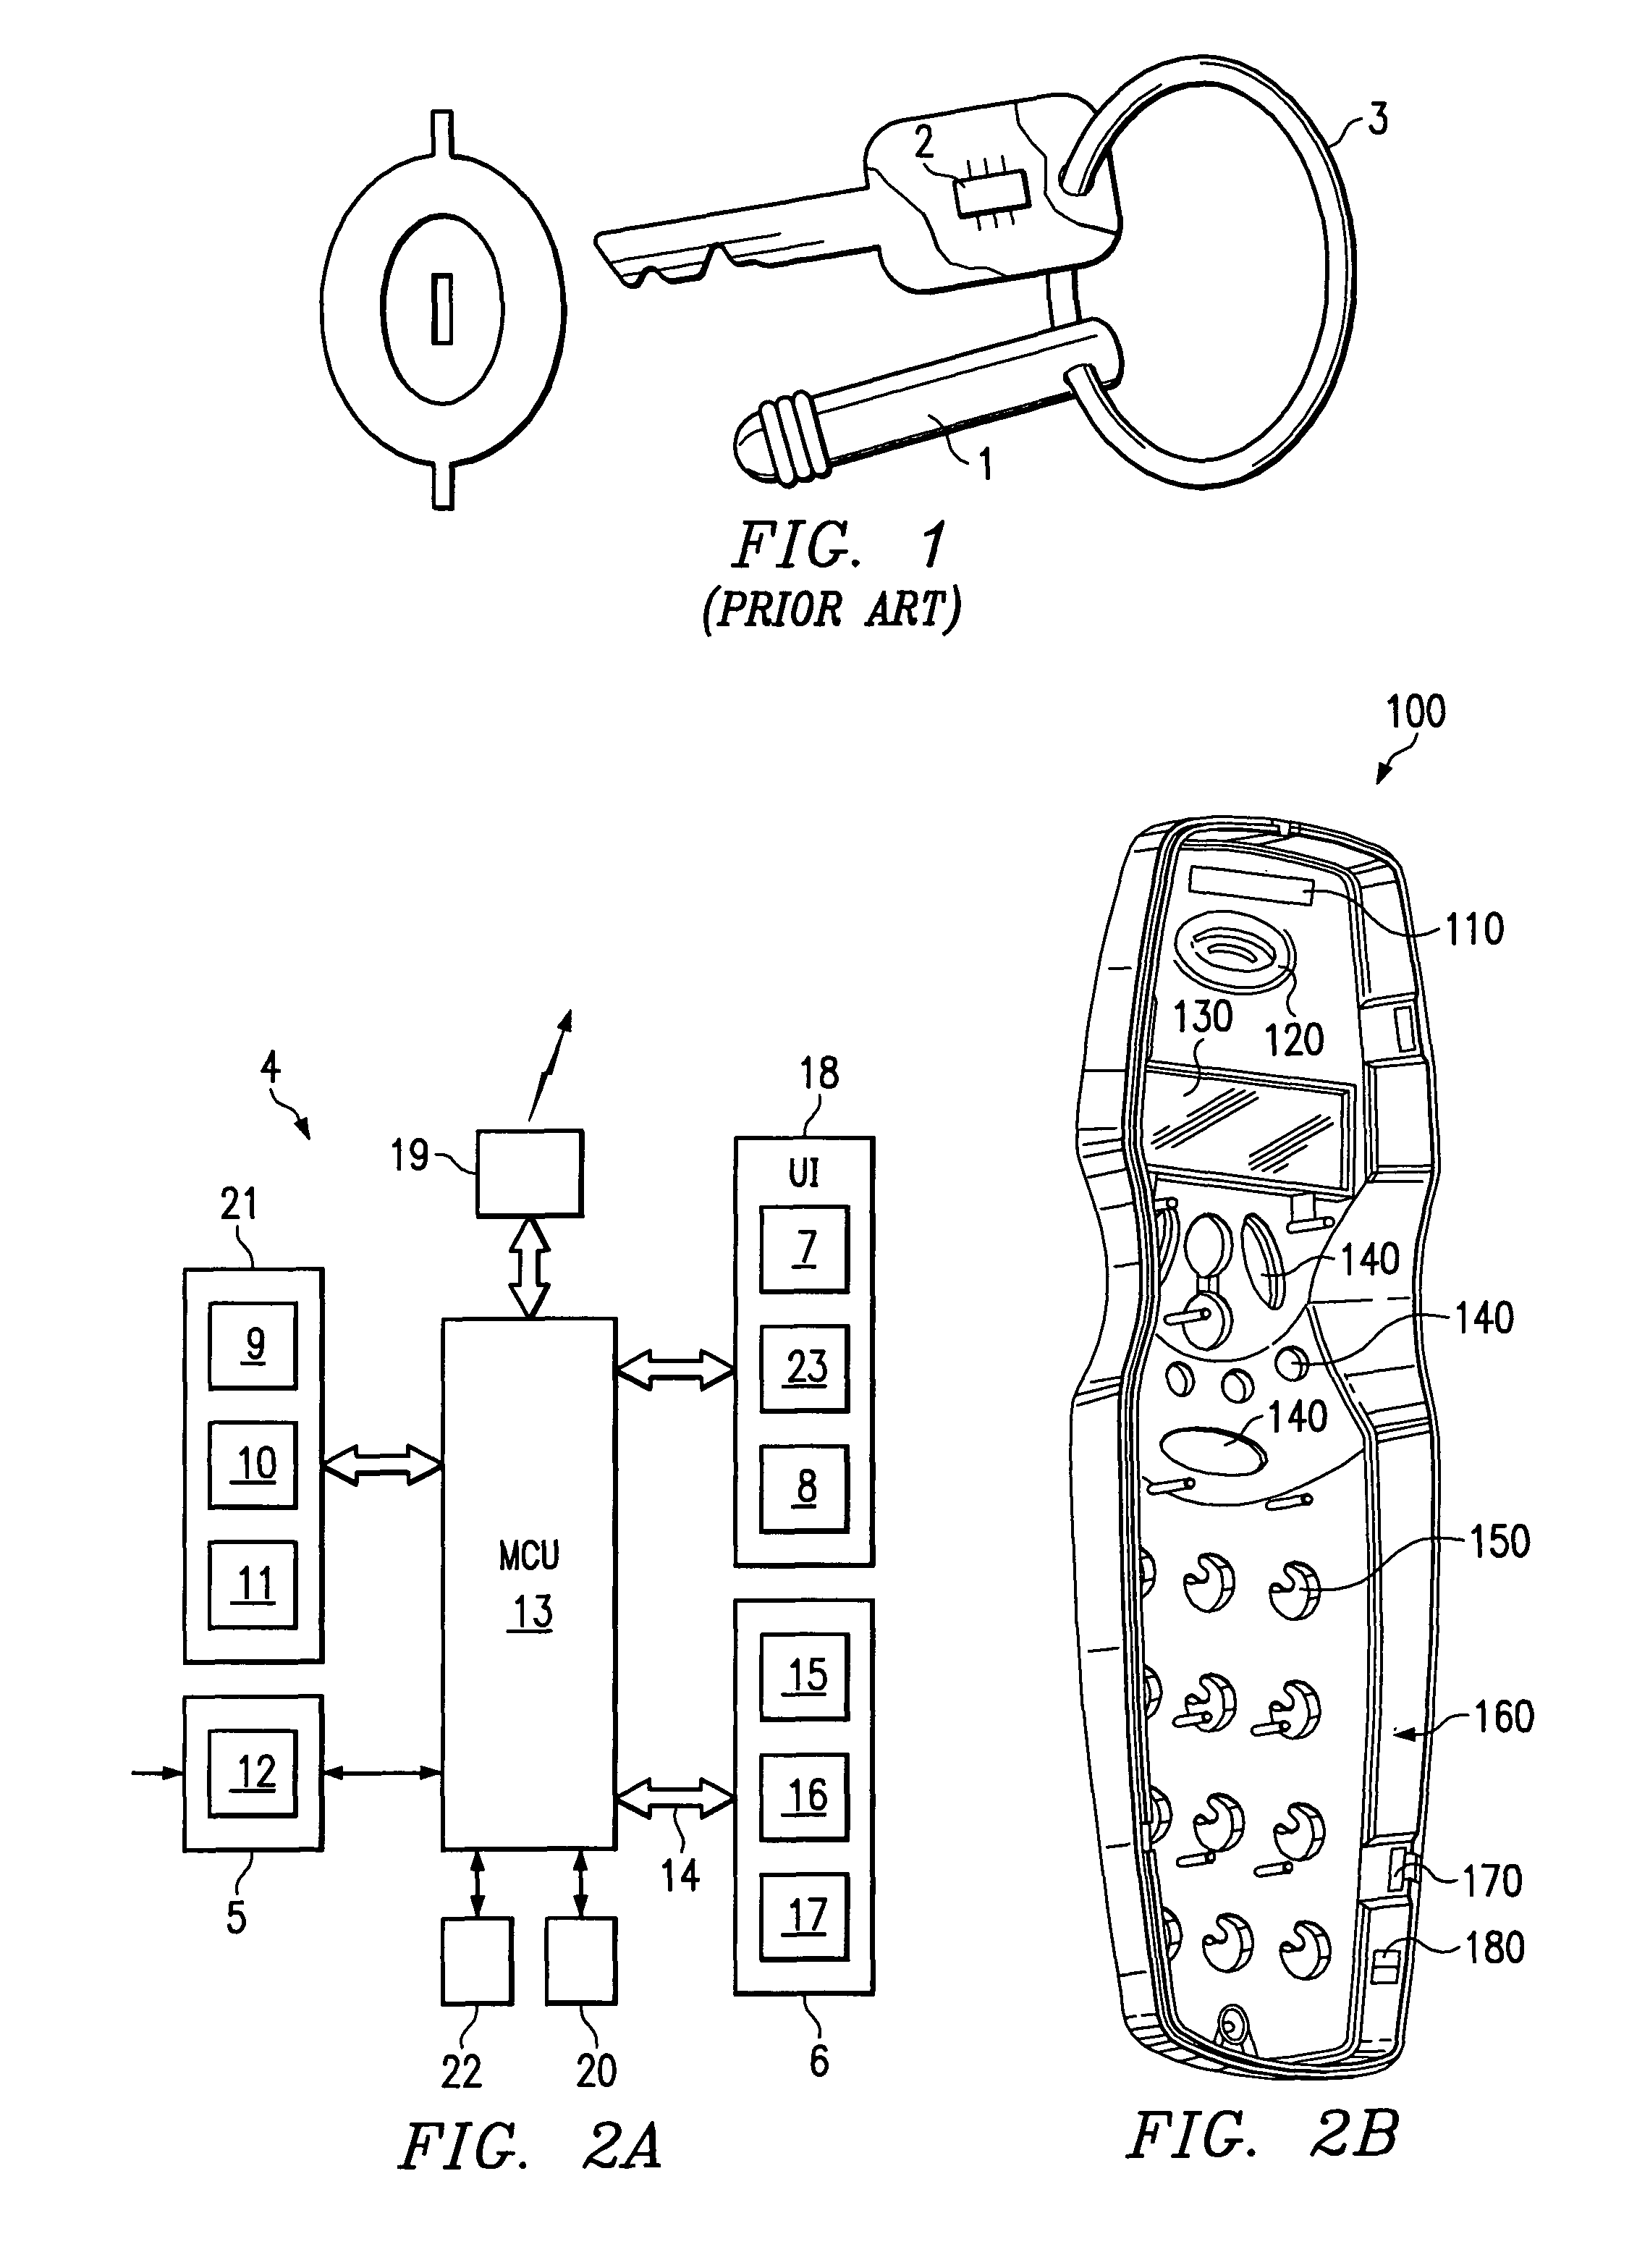 Electronic payment methods for a mobile device